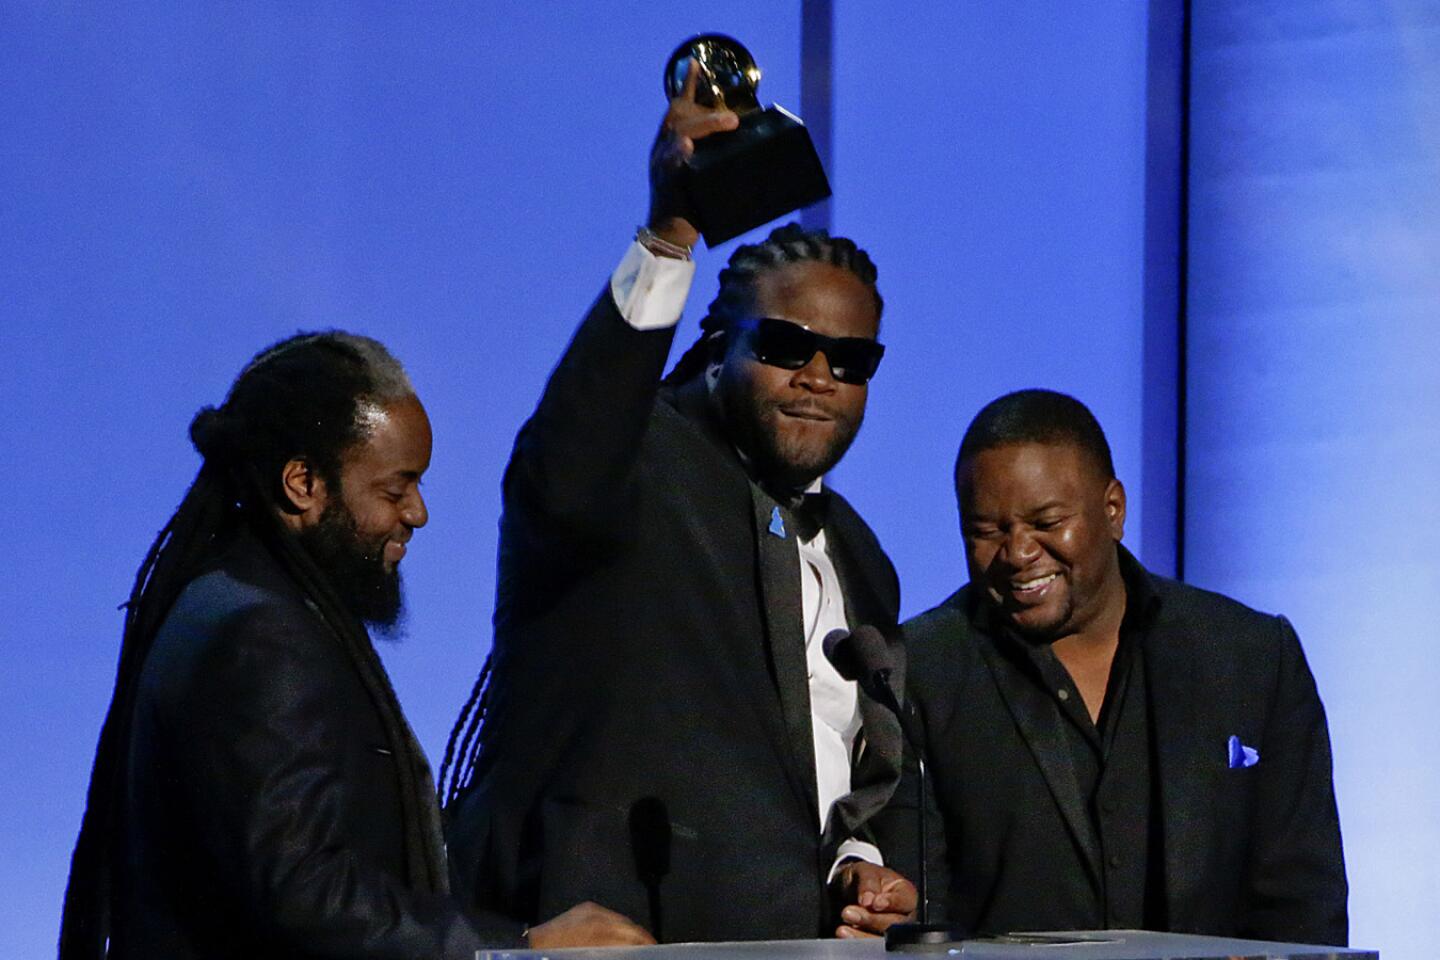 Musicians Peter "Peetah" Morgan, left, Roy "Gramps" Morgan and Nakamyah "Lukes" Morgan of Morgan Heritage accept the award for reggae album for "Strictly Roots" at the pre-telecast show.